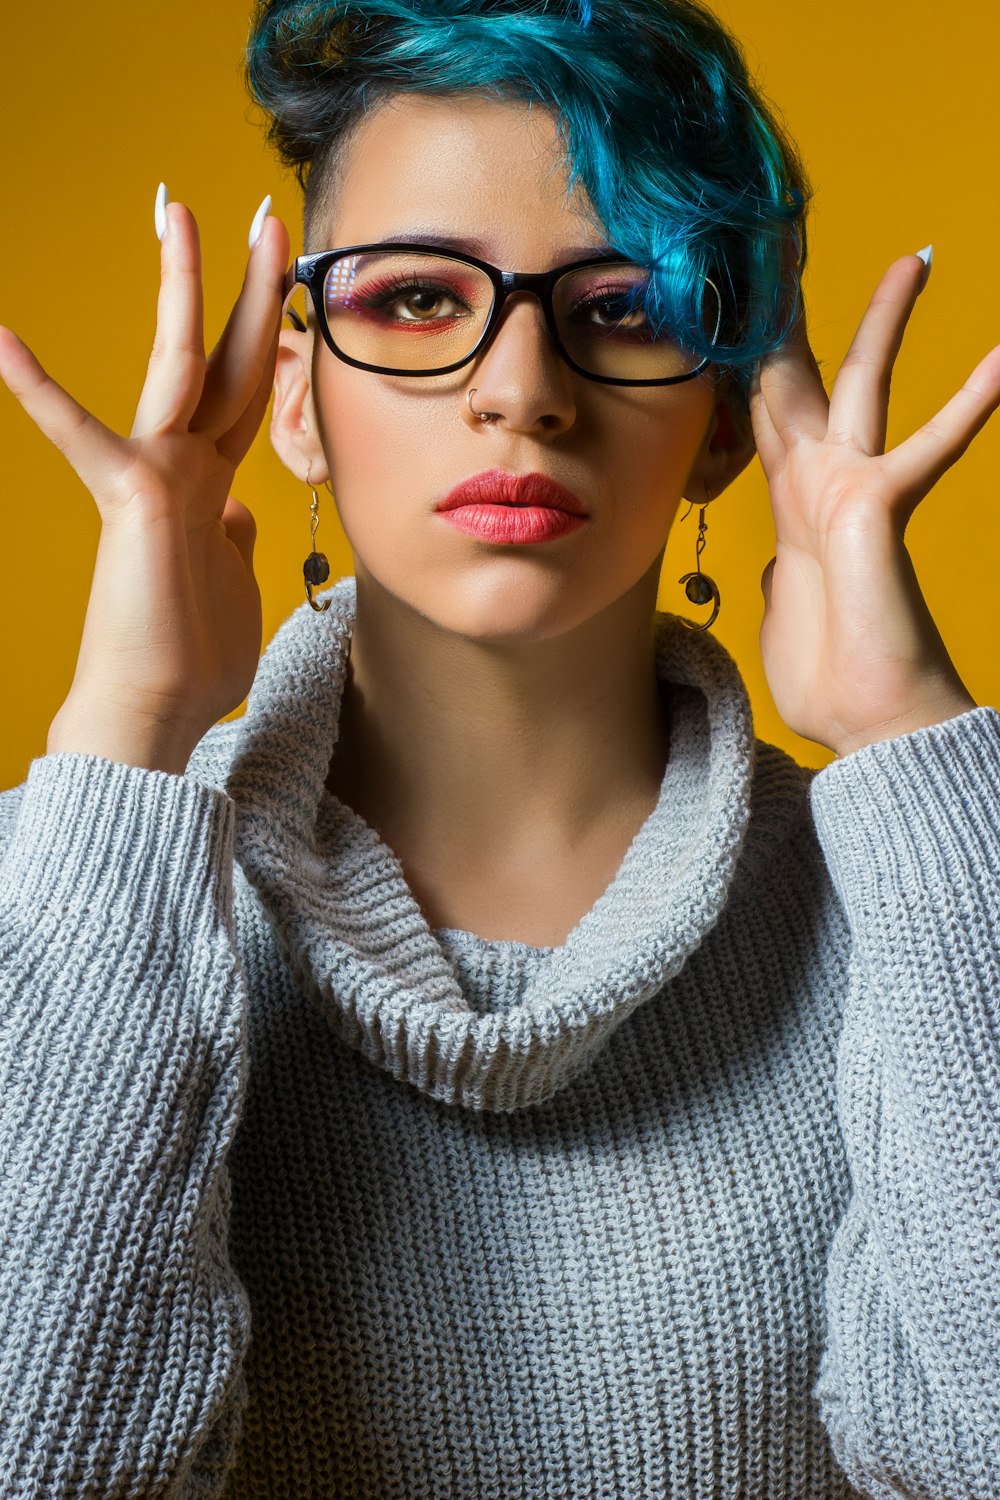 a woman with blue hair wearing glasses and a sweater